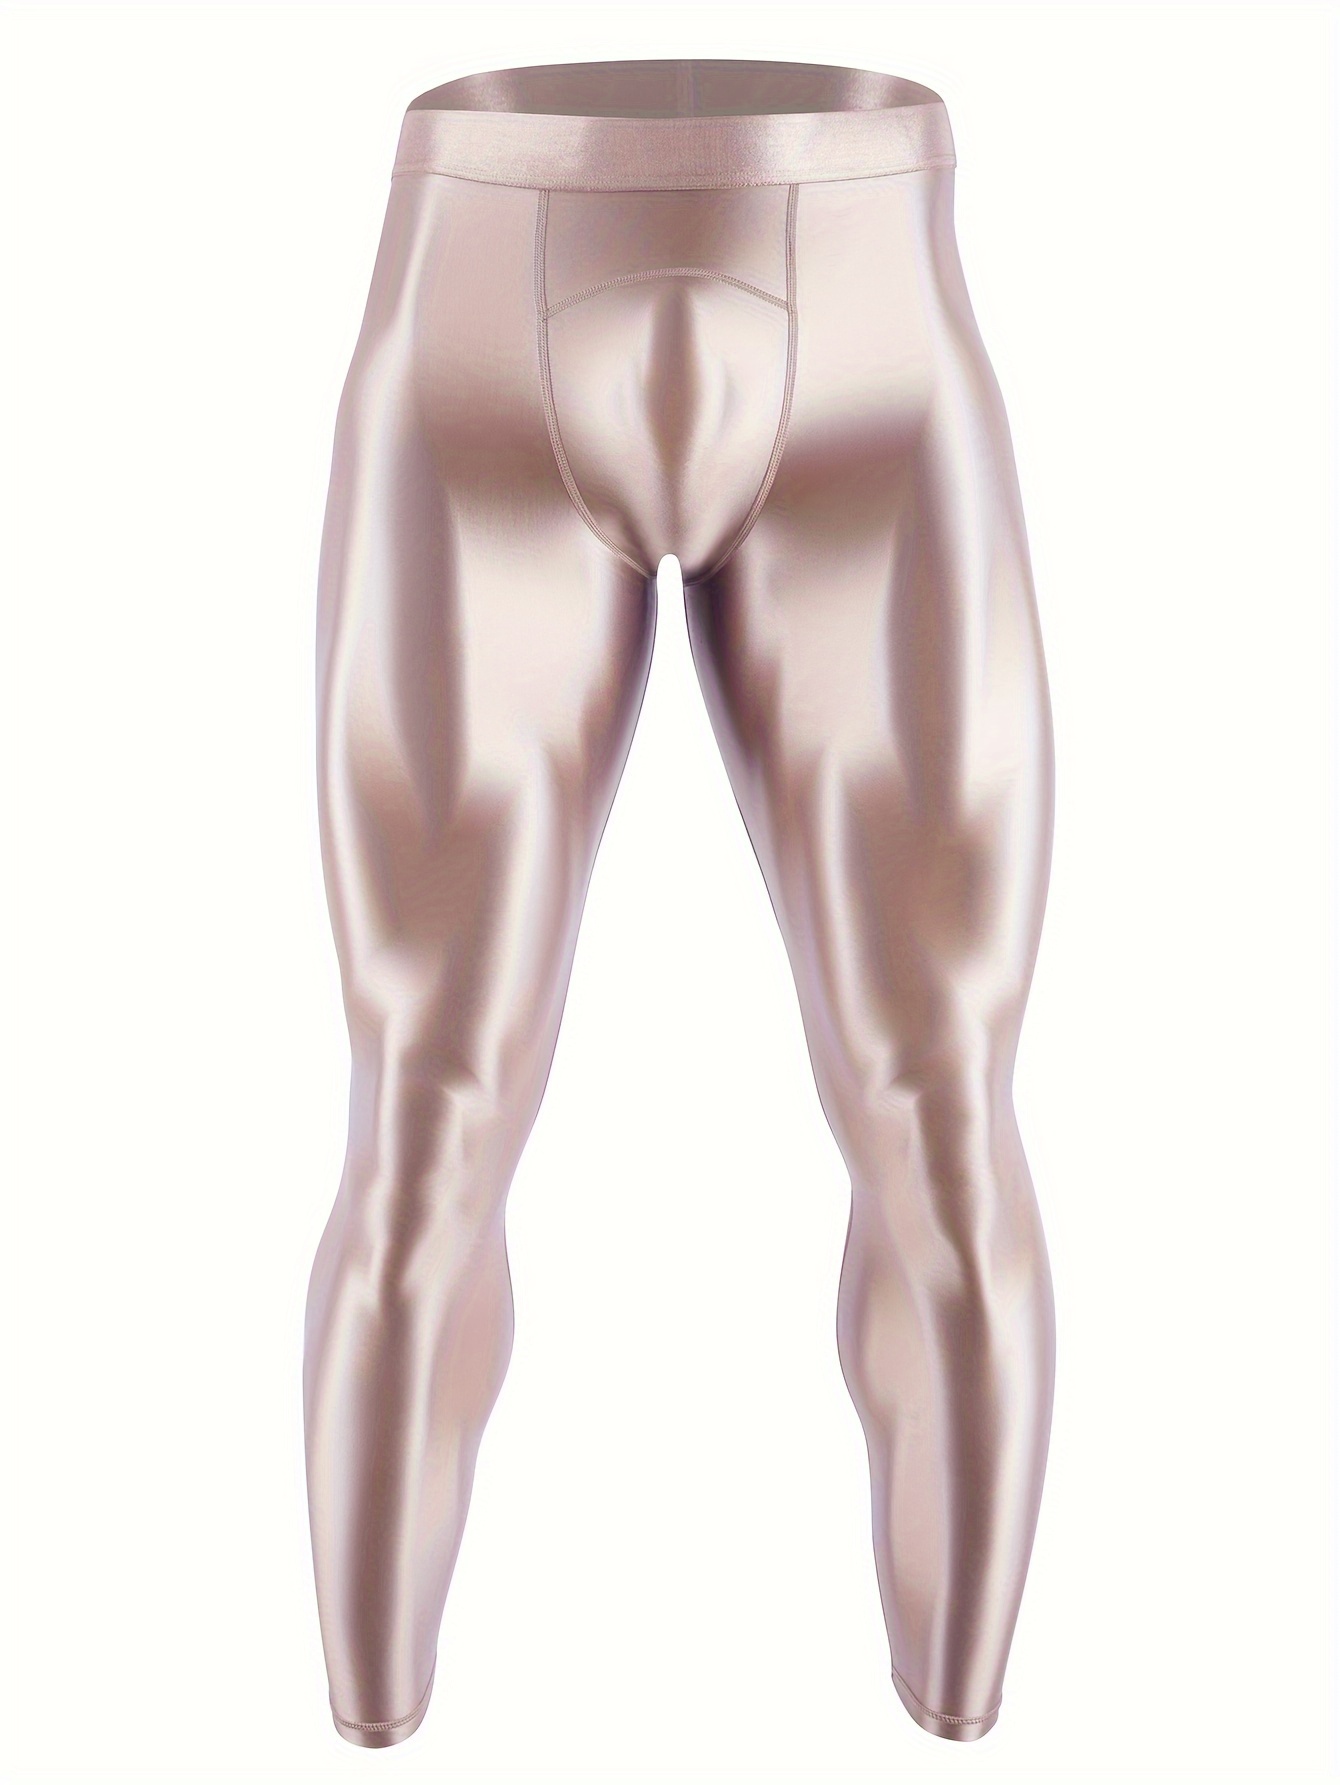  winying Men's Oil Glossy Compression Pants Shiny